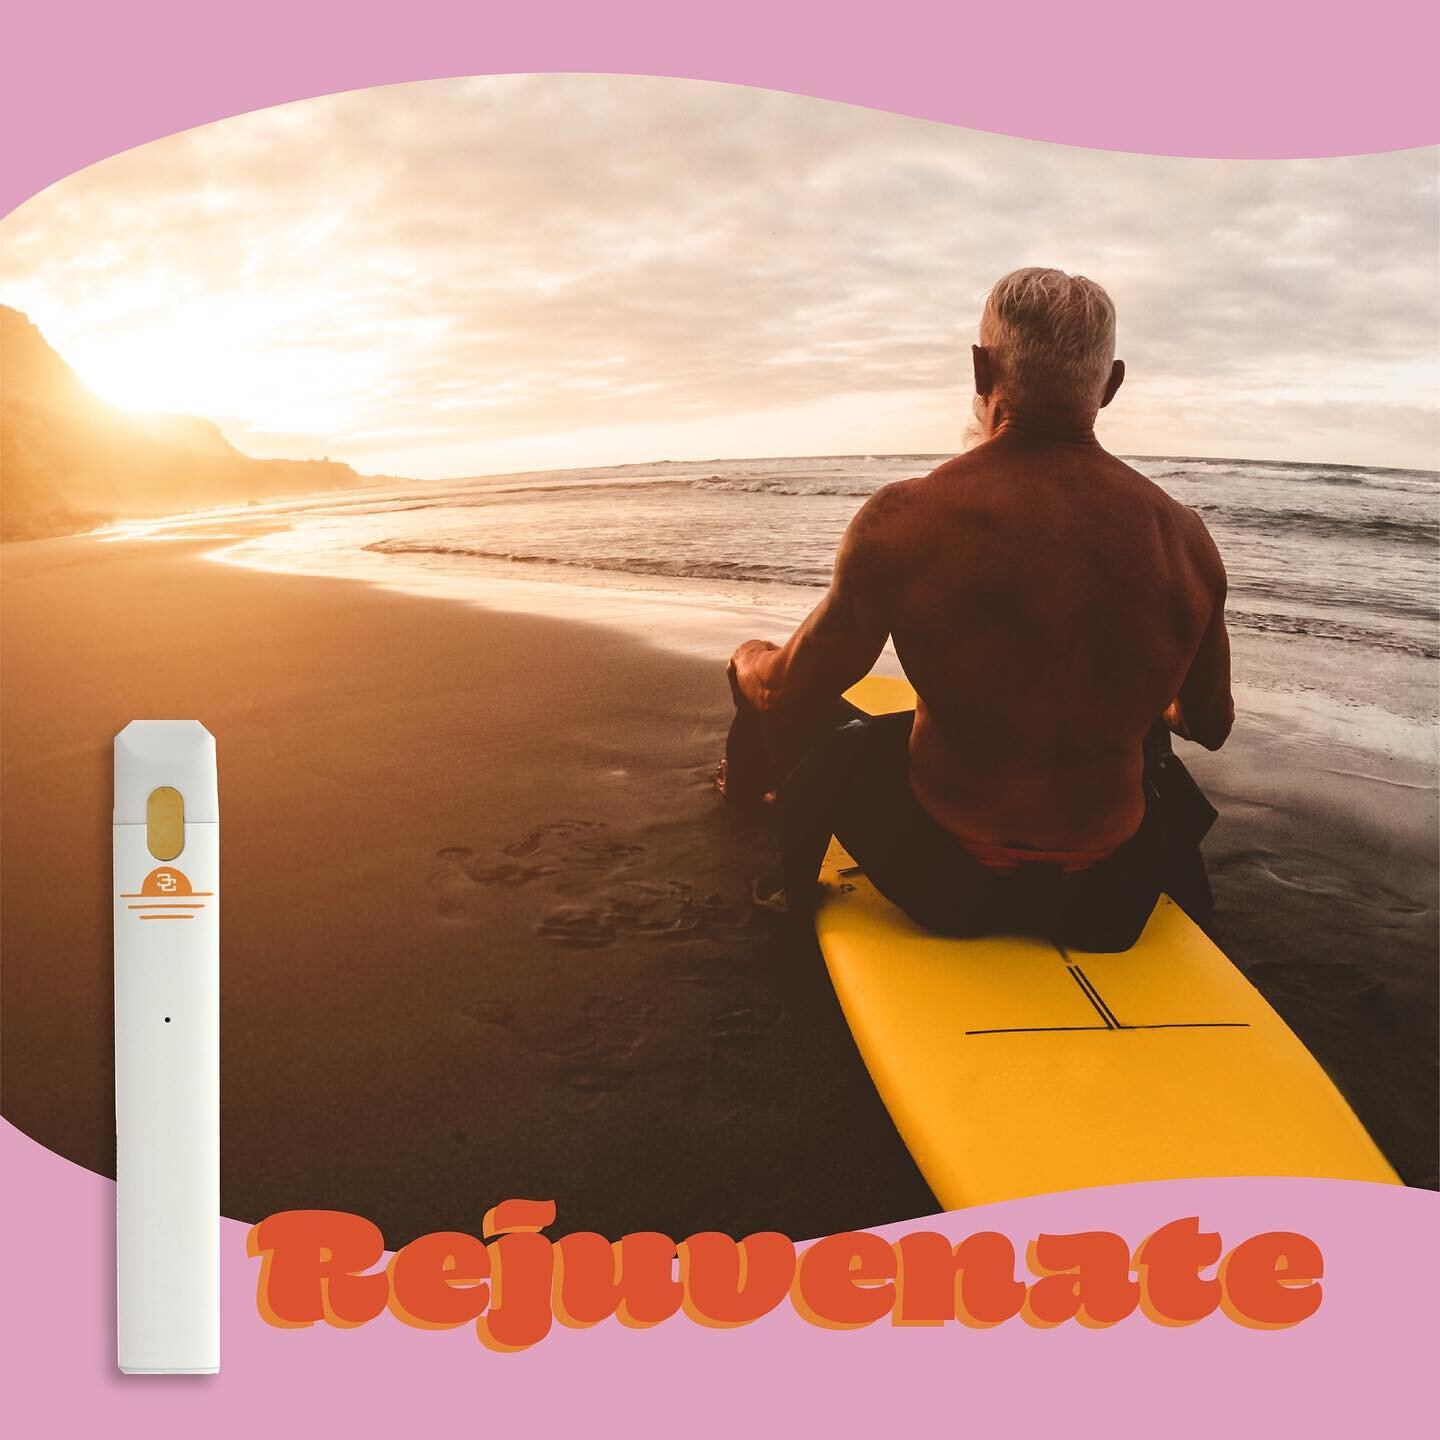 Got your 3 R&rsquo;s? We do.. 😉 

Enjoy our sunrise, noontide, or sunset smokables to set your mood for the day! 🌅

#hemp #canna #texas #fun #relax #energize #party